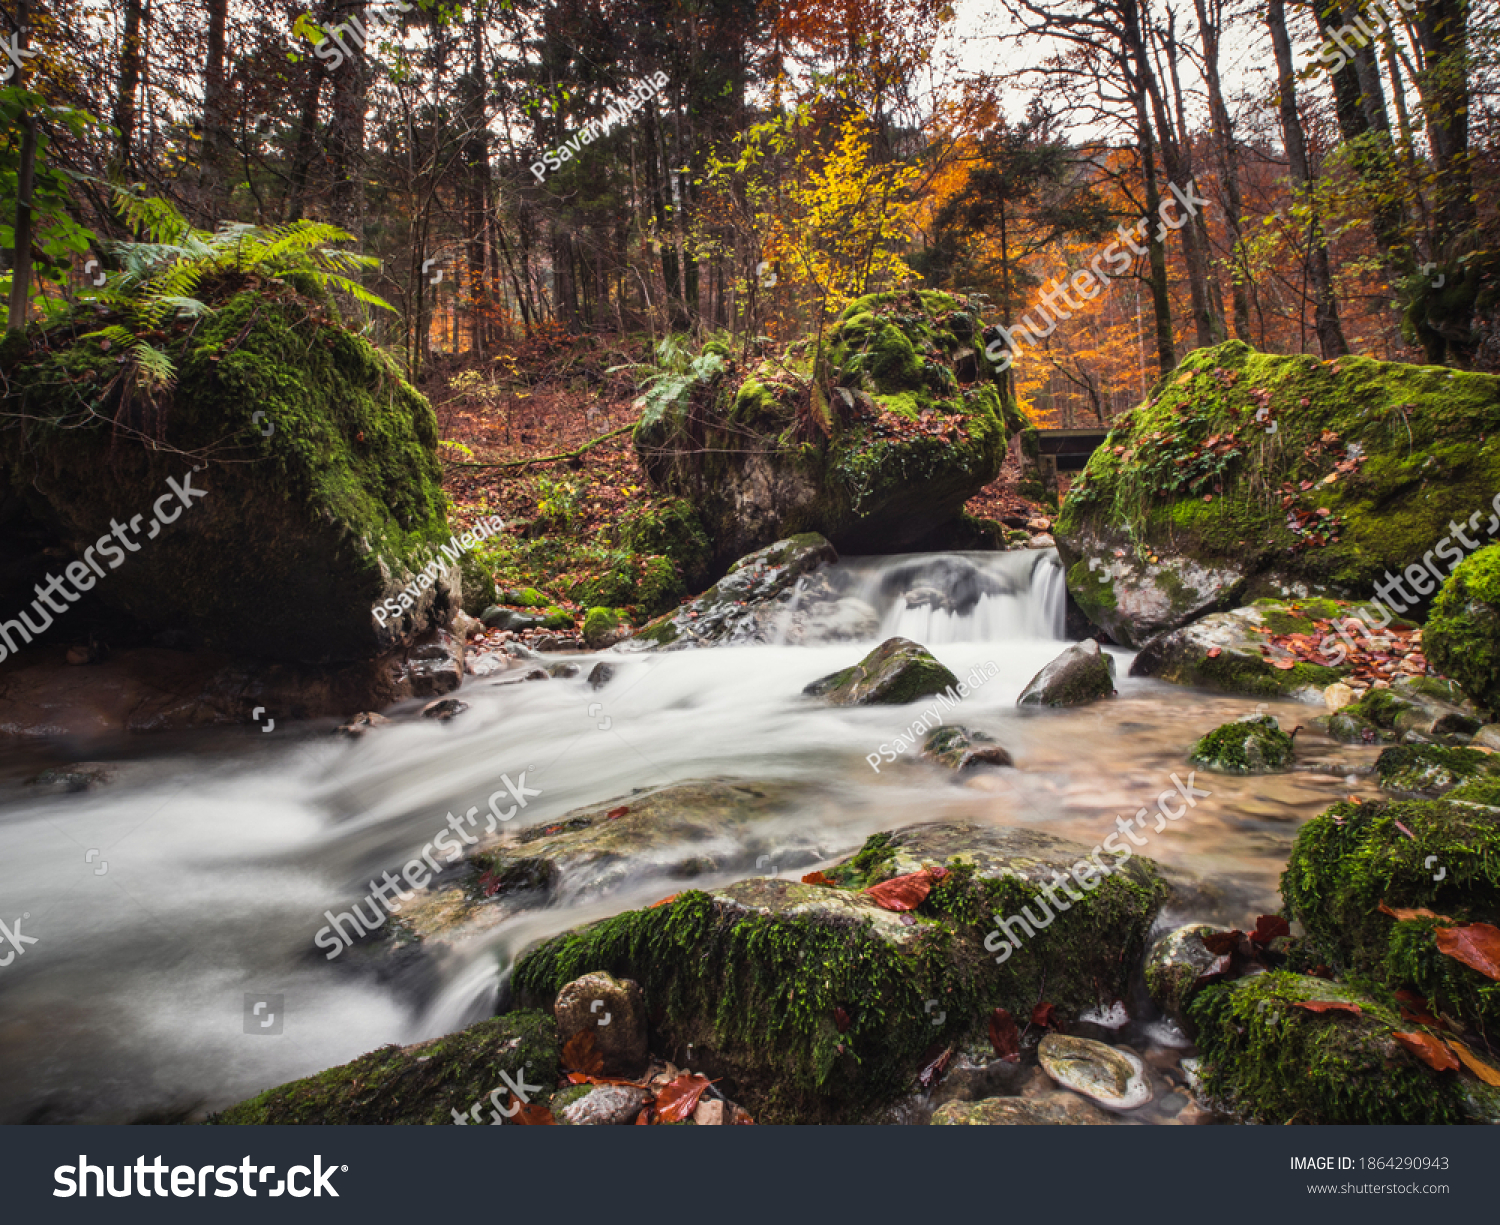 Autumn Colours Mystical Forest Small Torrent Stock Photo Edit Now 1864290943